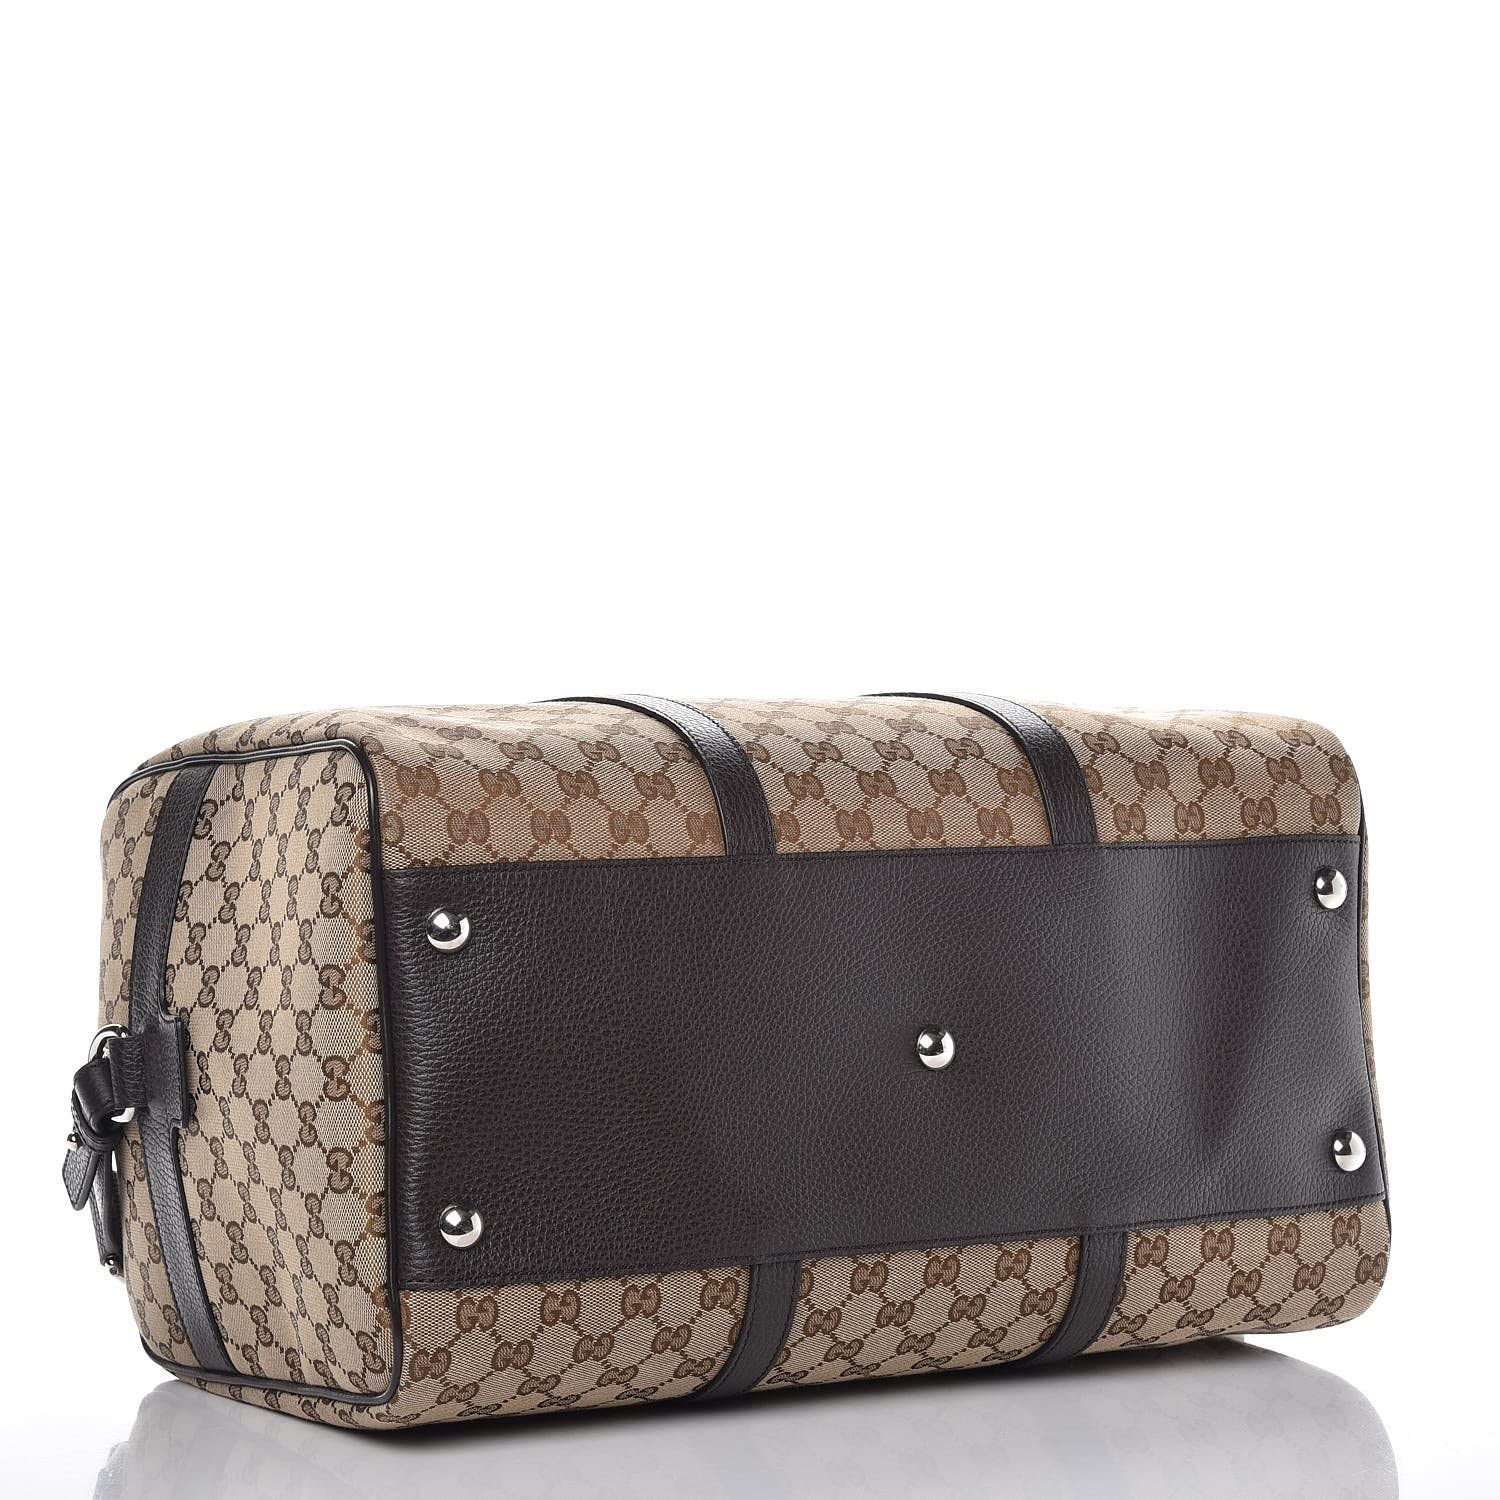 Gucci Savoy large duffle bag in beige and ebony Supreme | GUCCI® US